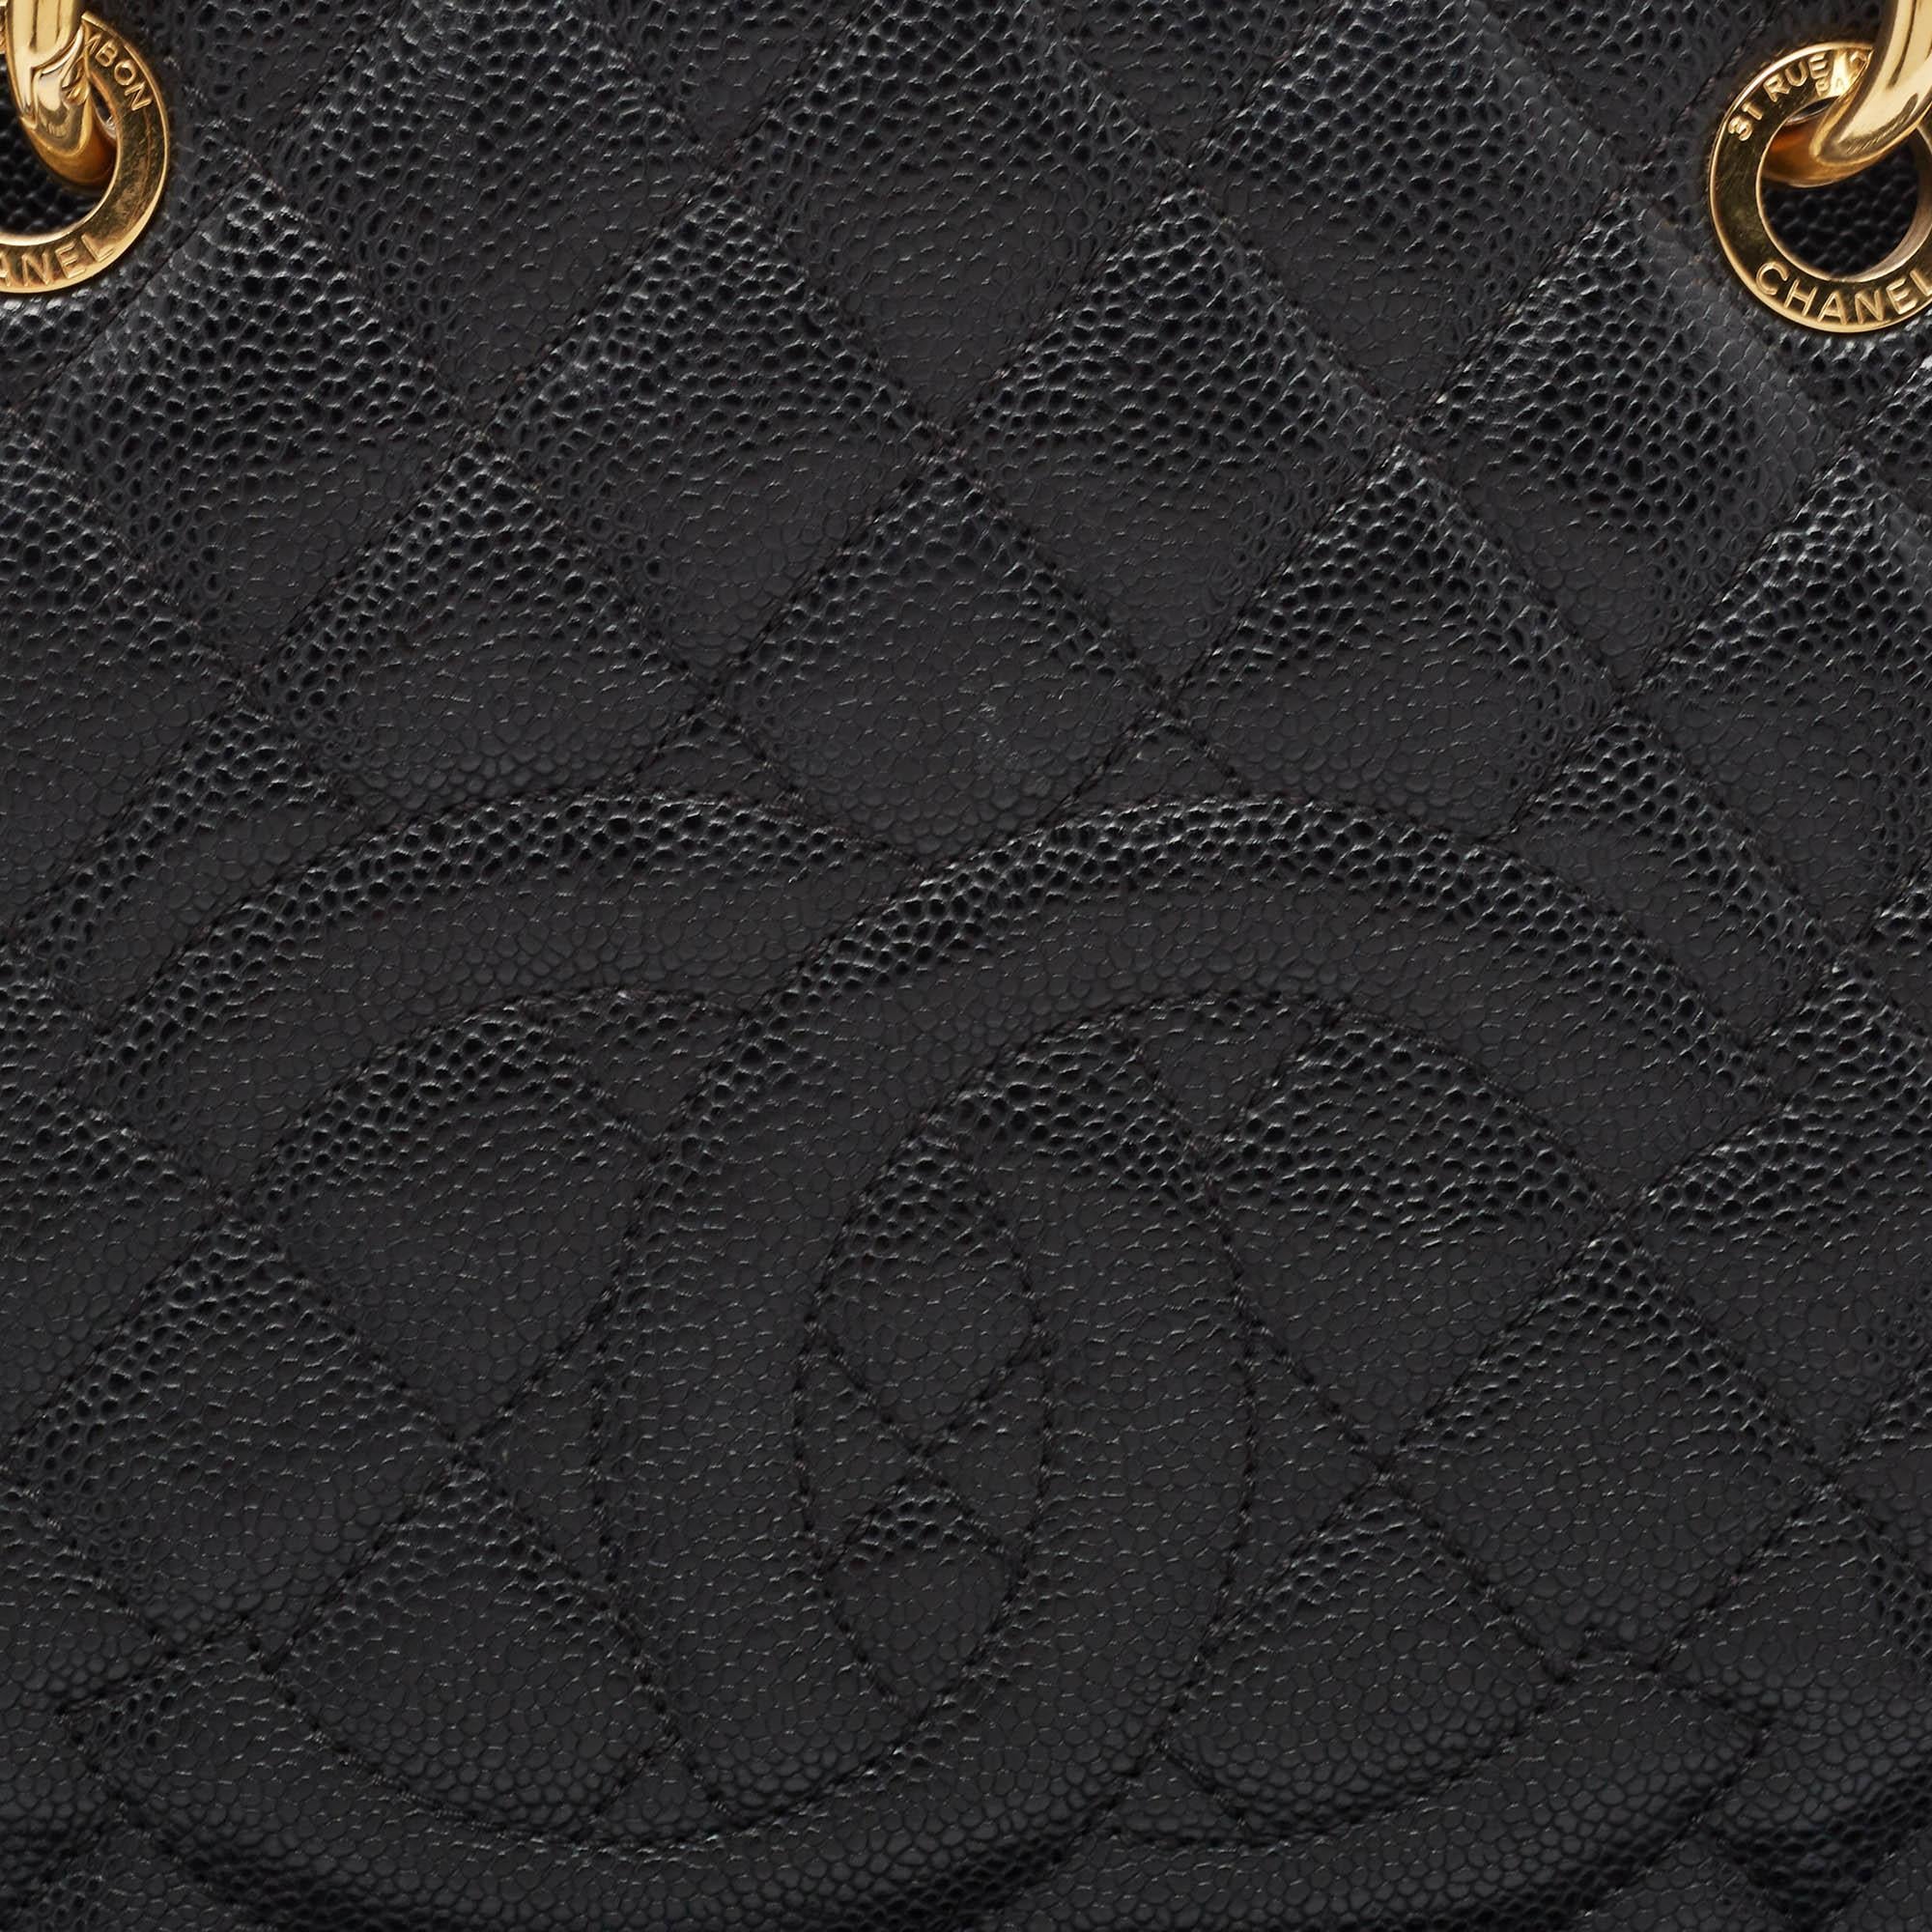 Chanel Black Quilted Caviar Leather GST Shopper Tote 5